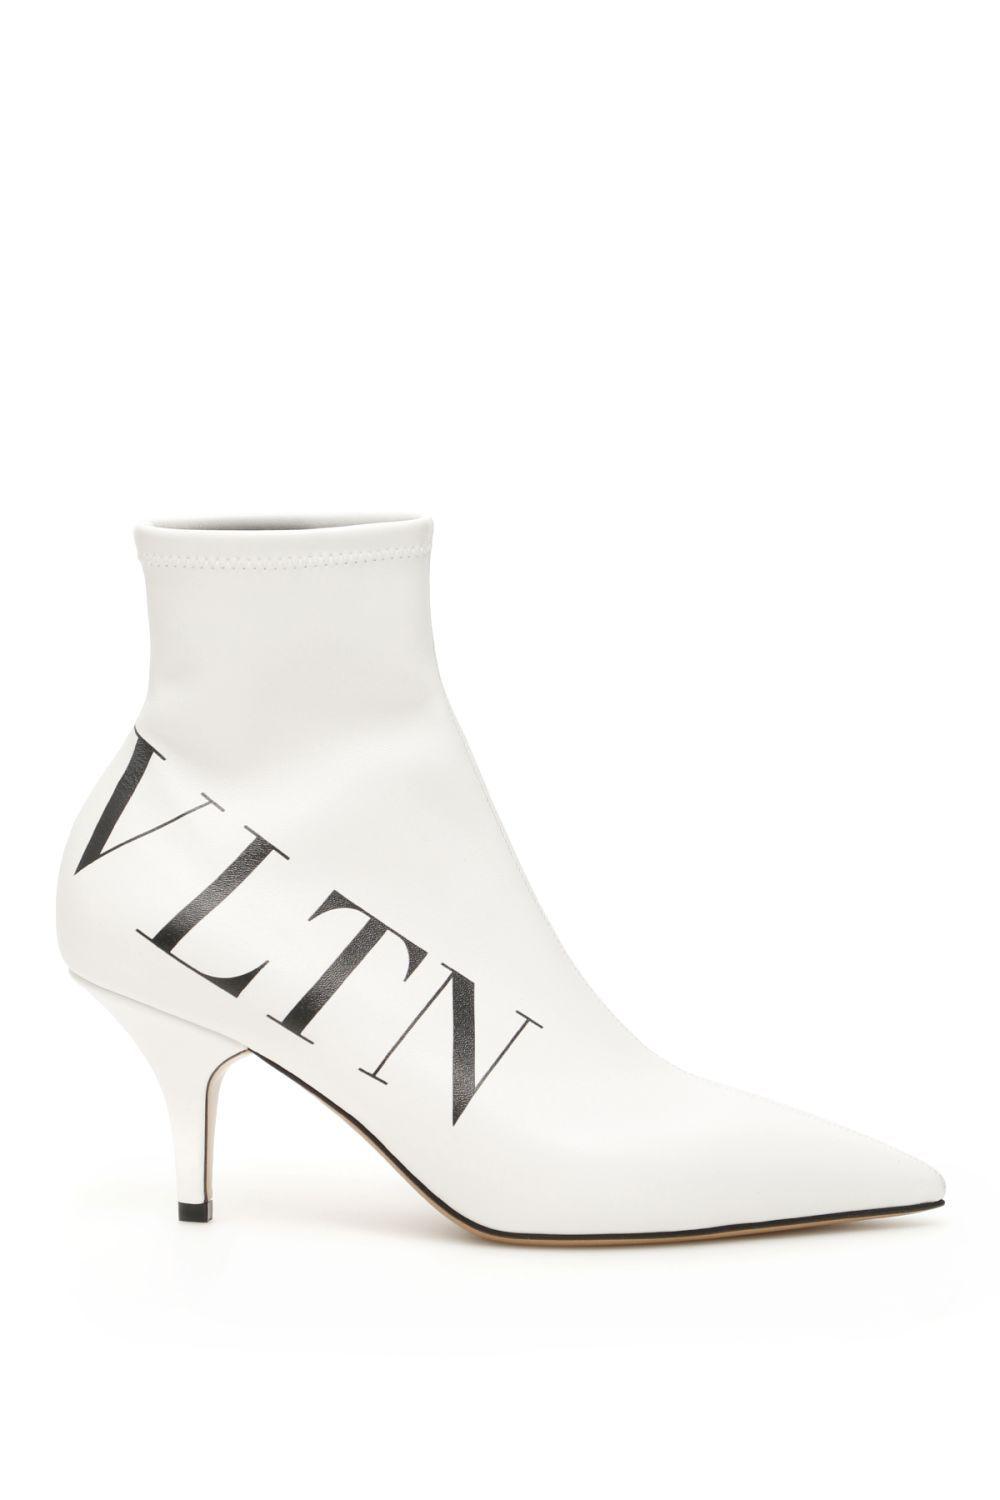 Valentino Leather Vltn Sock Boots in White - Save 19% - Lyst